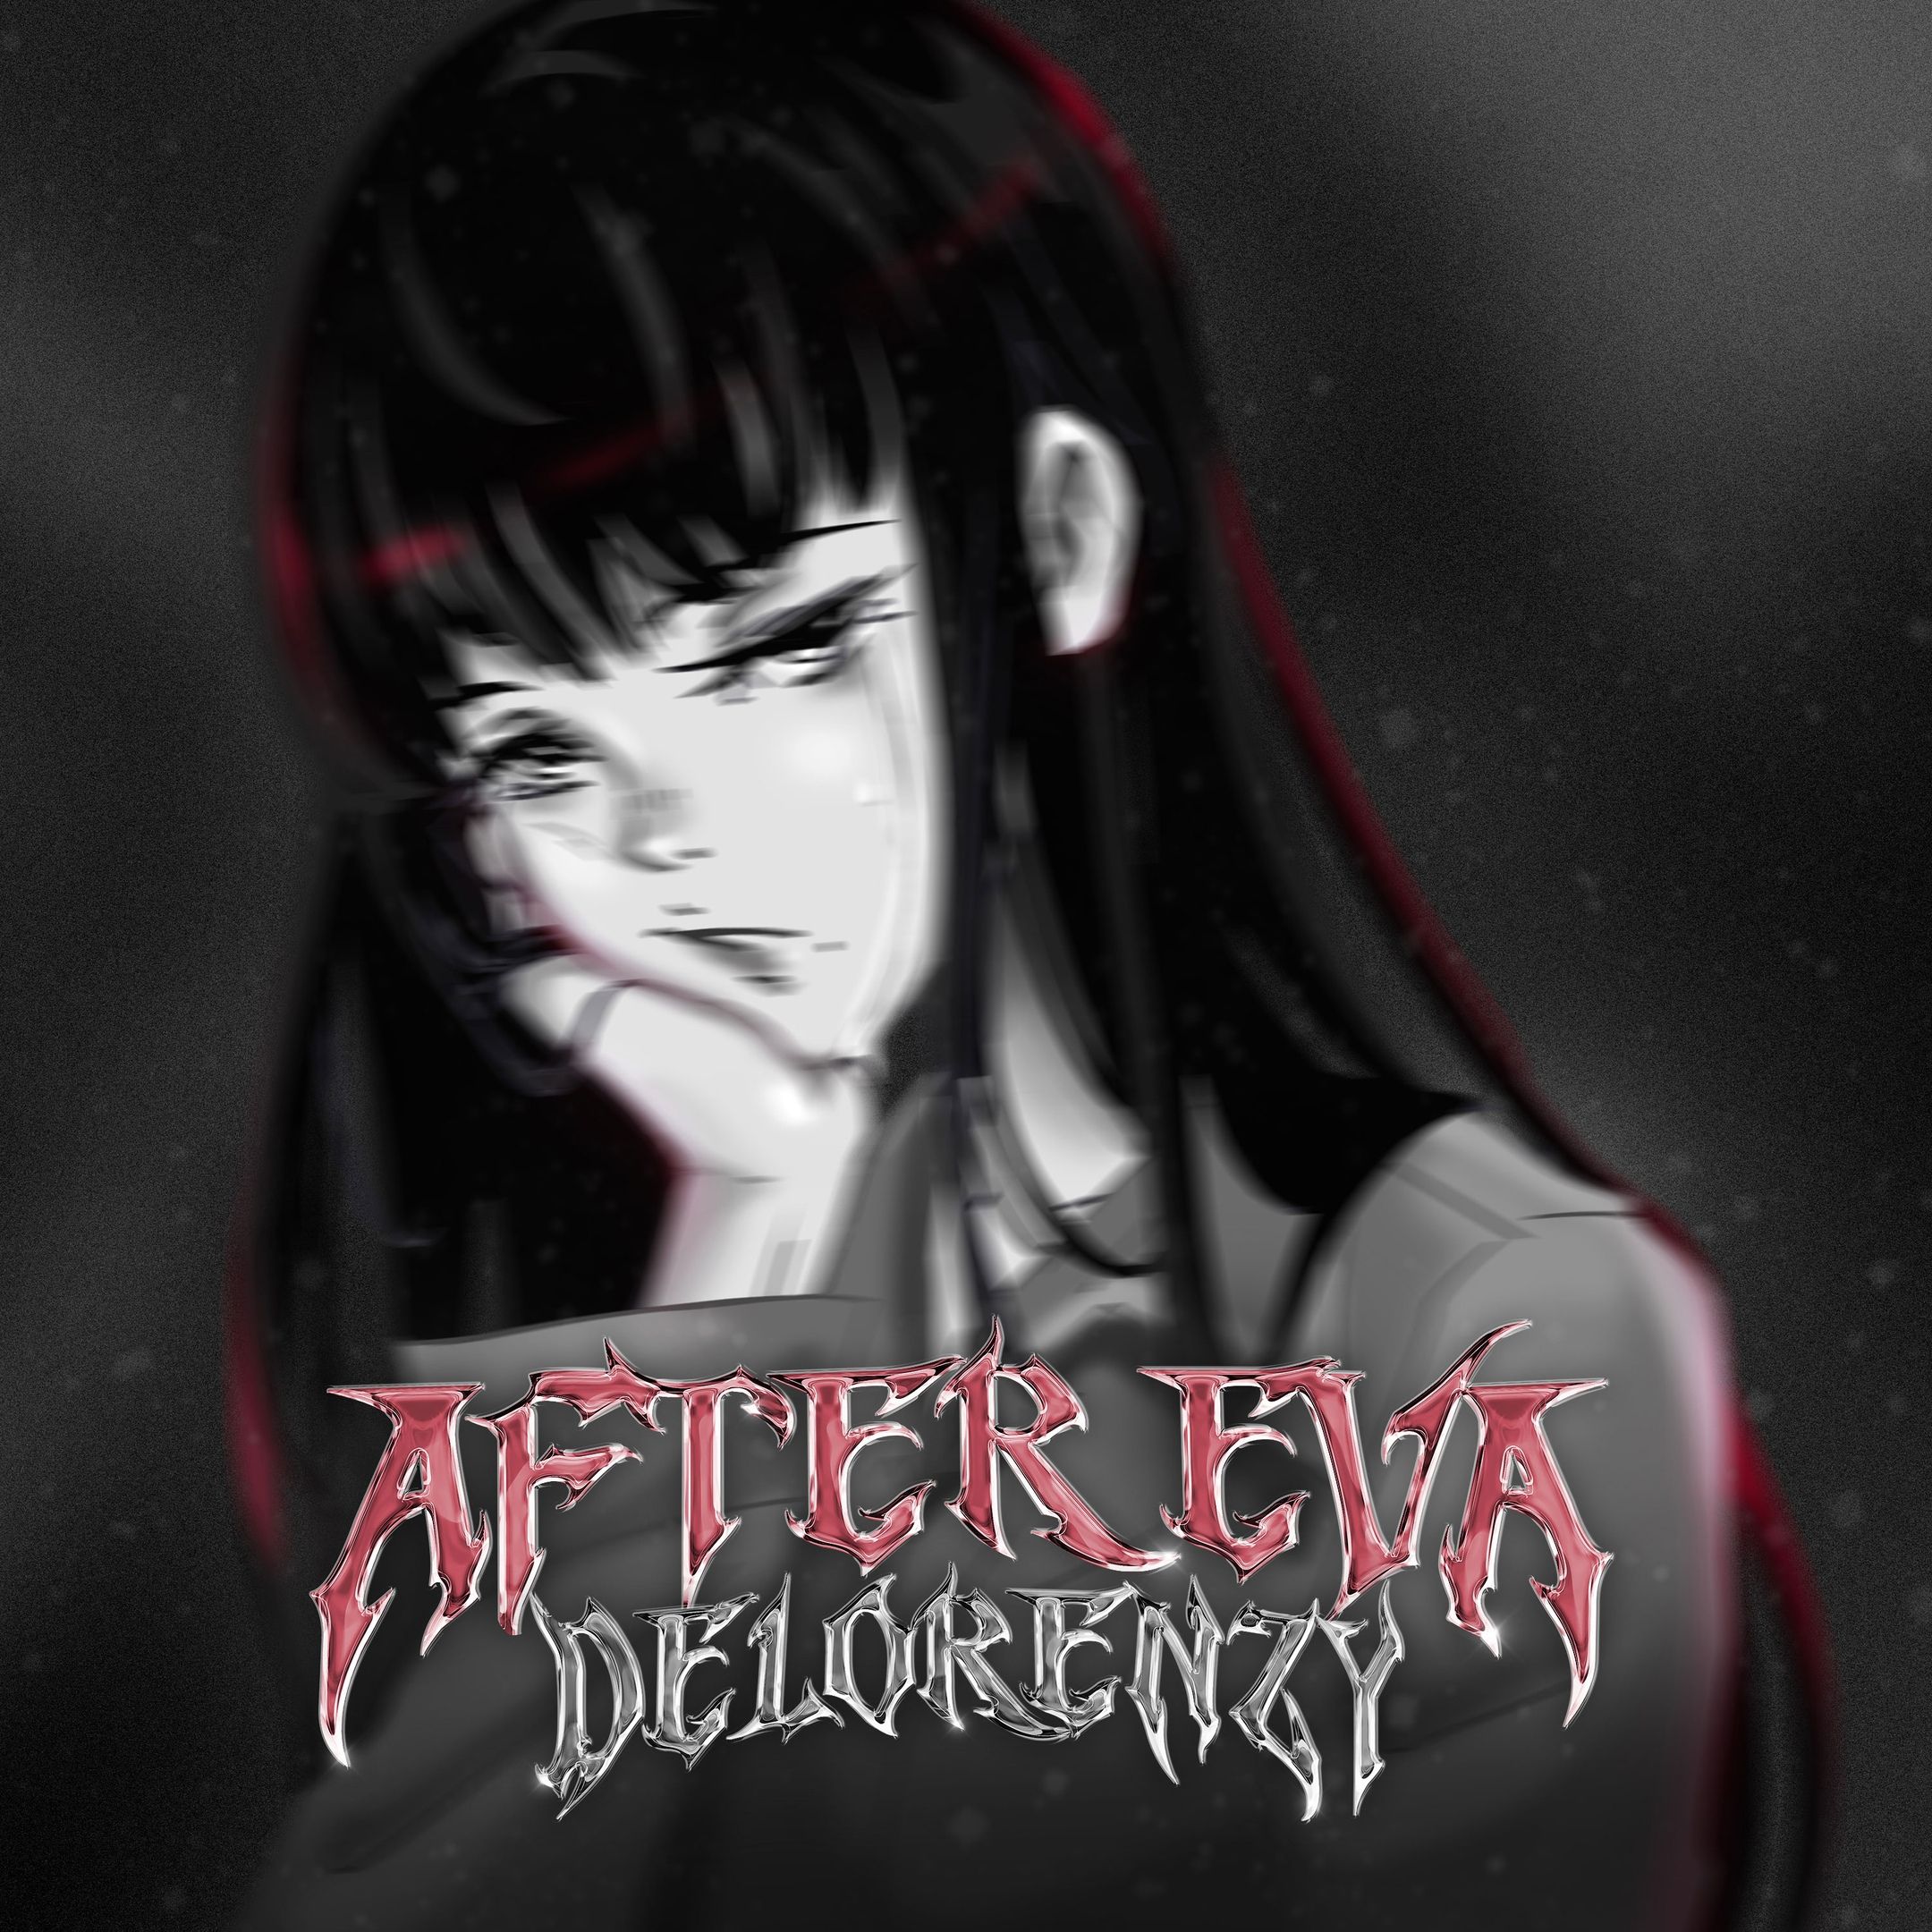 Aflaai DELORENZY - After Eva